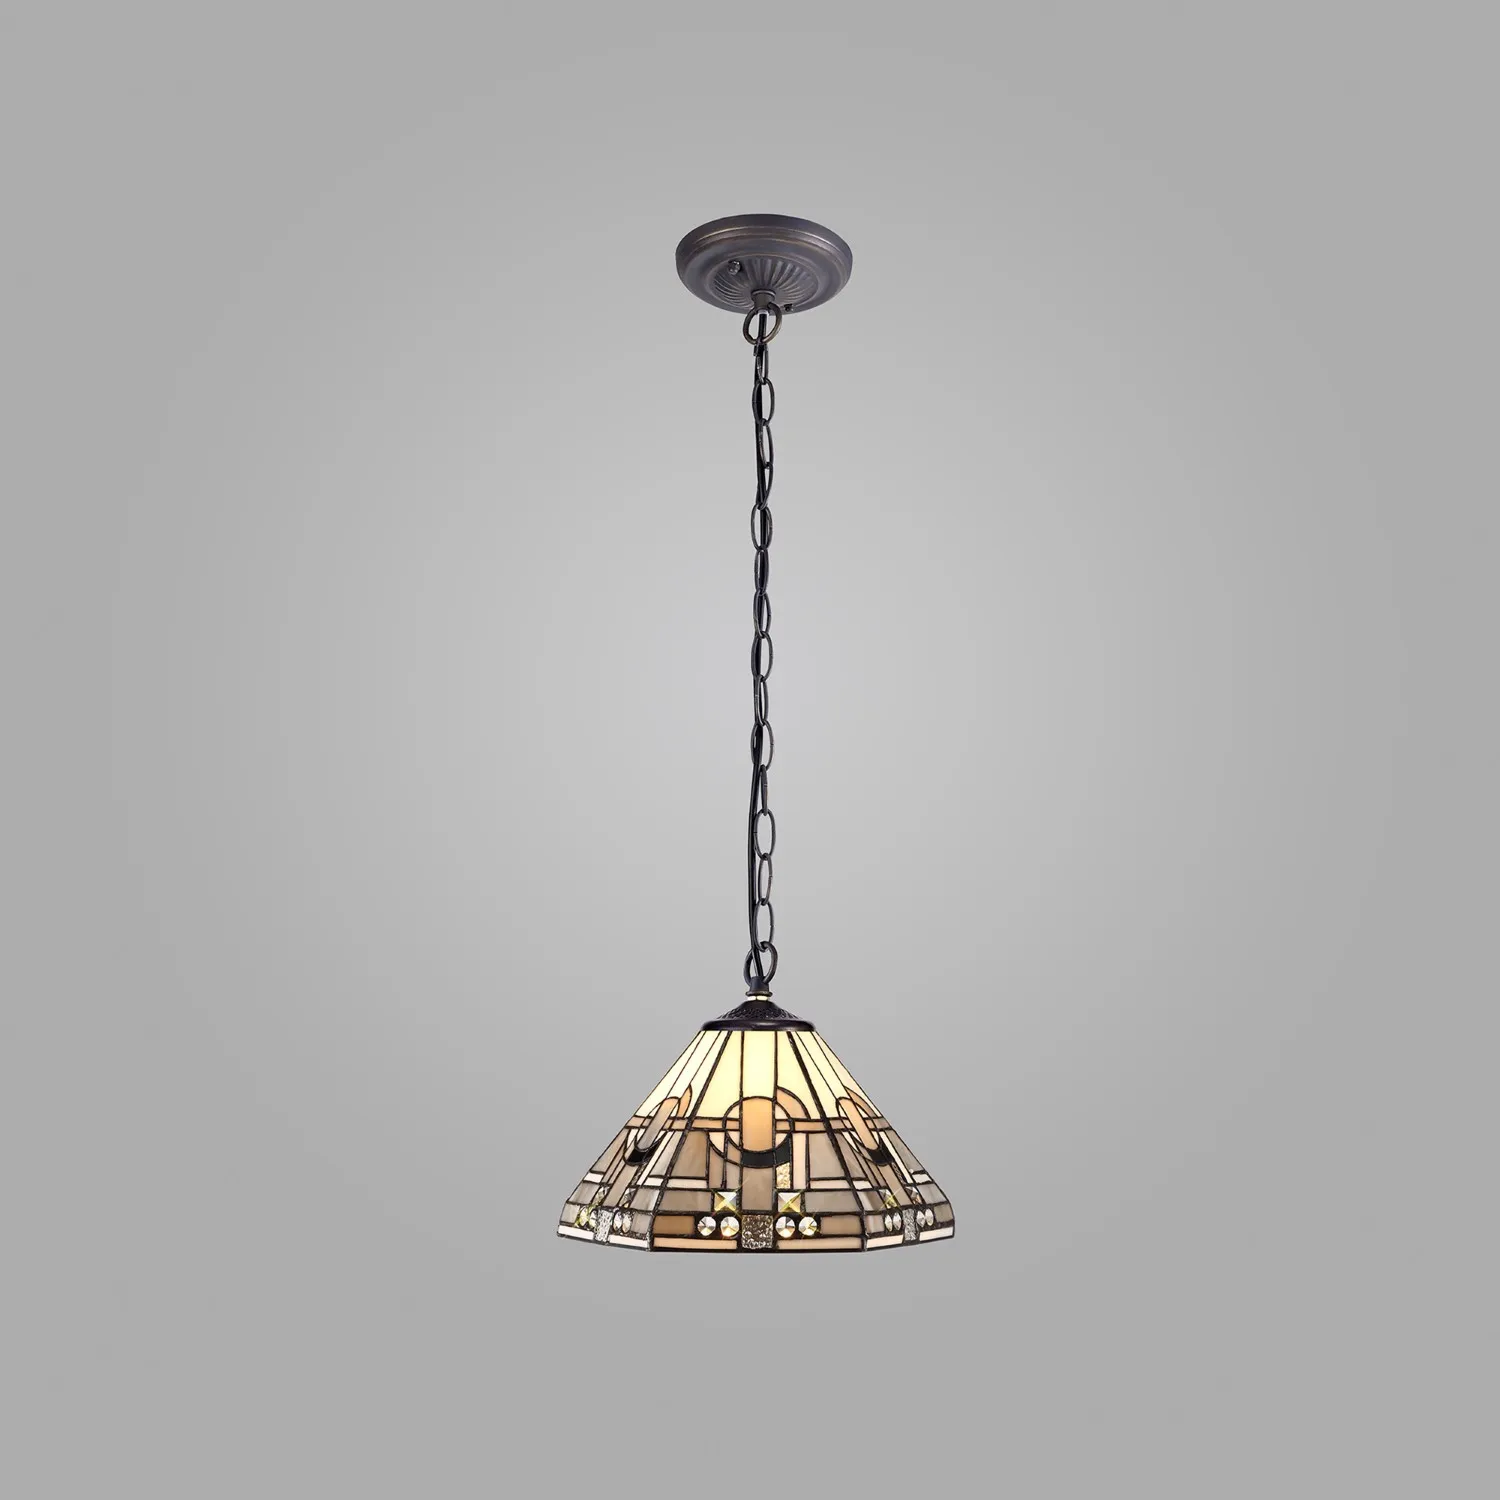 Knebworth 1 Light Downlighter Pendant E27 With 30cm Tiffany Shade, White Grey Black Clear Crystal Aged Antique Brass